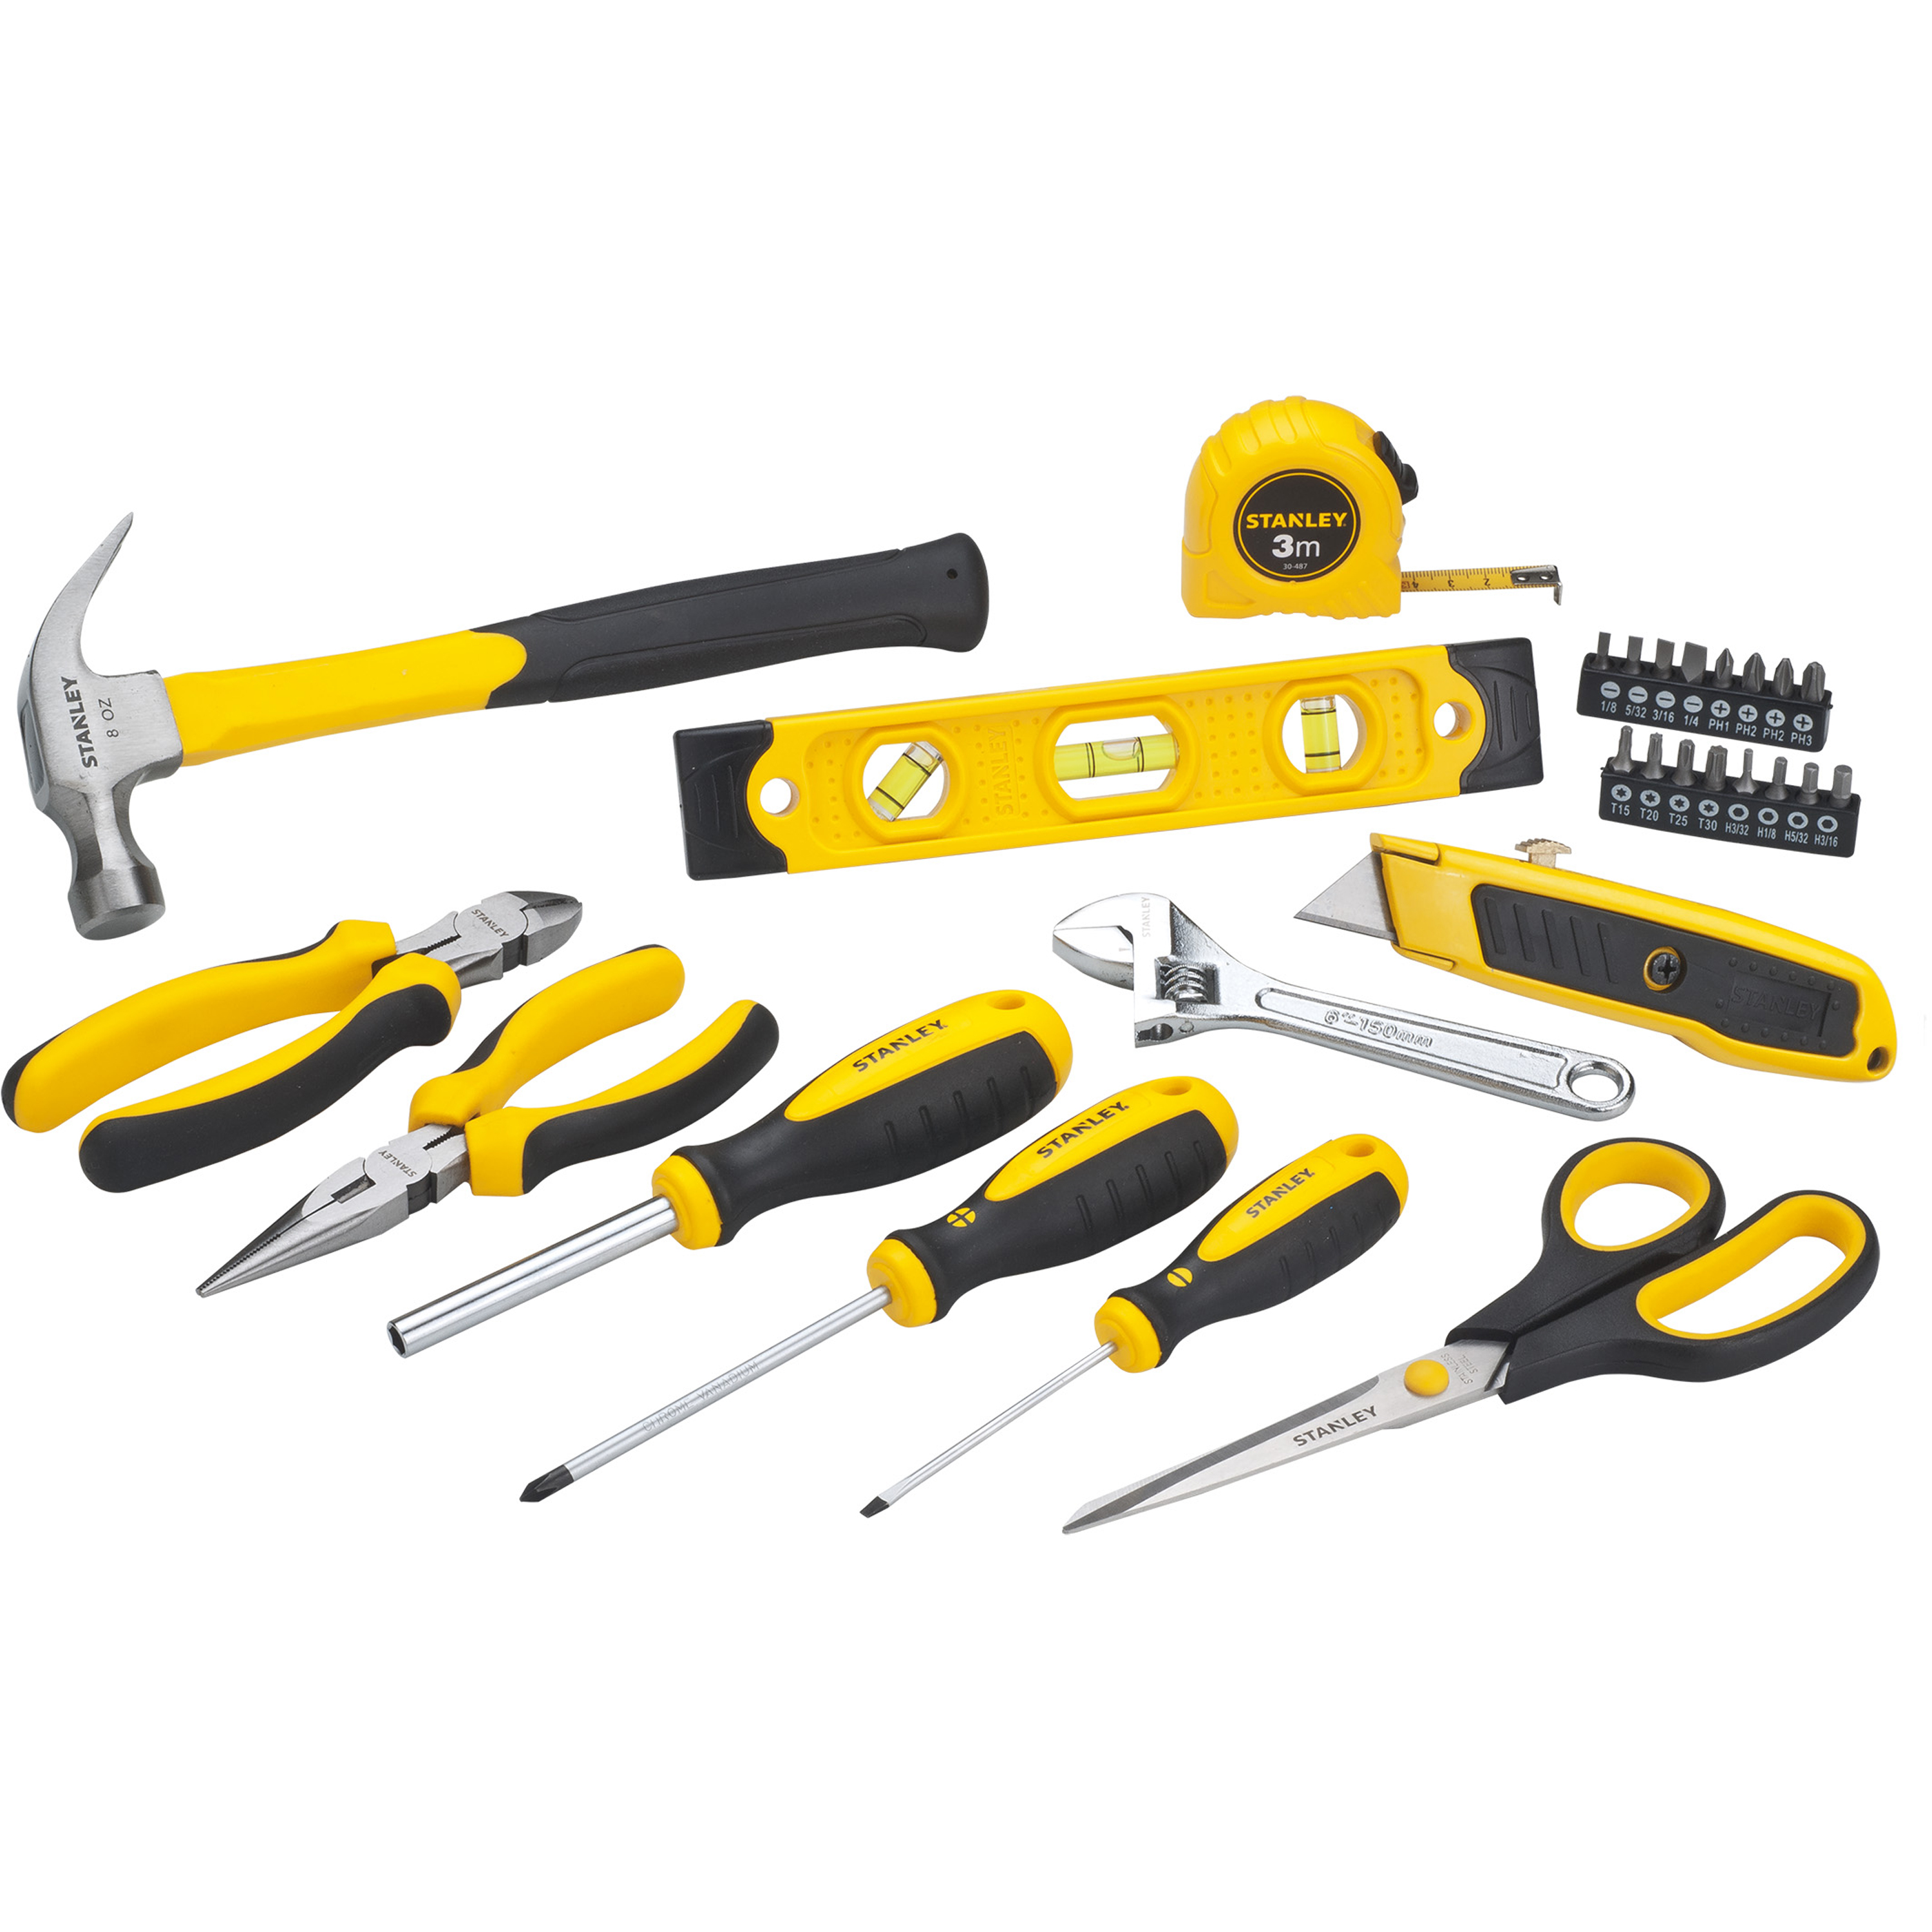 STANLEY 28 Piece Home Project Hand Tool Set, STHT75949 - image 2 of 3